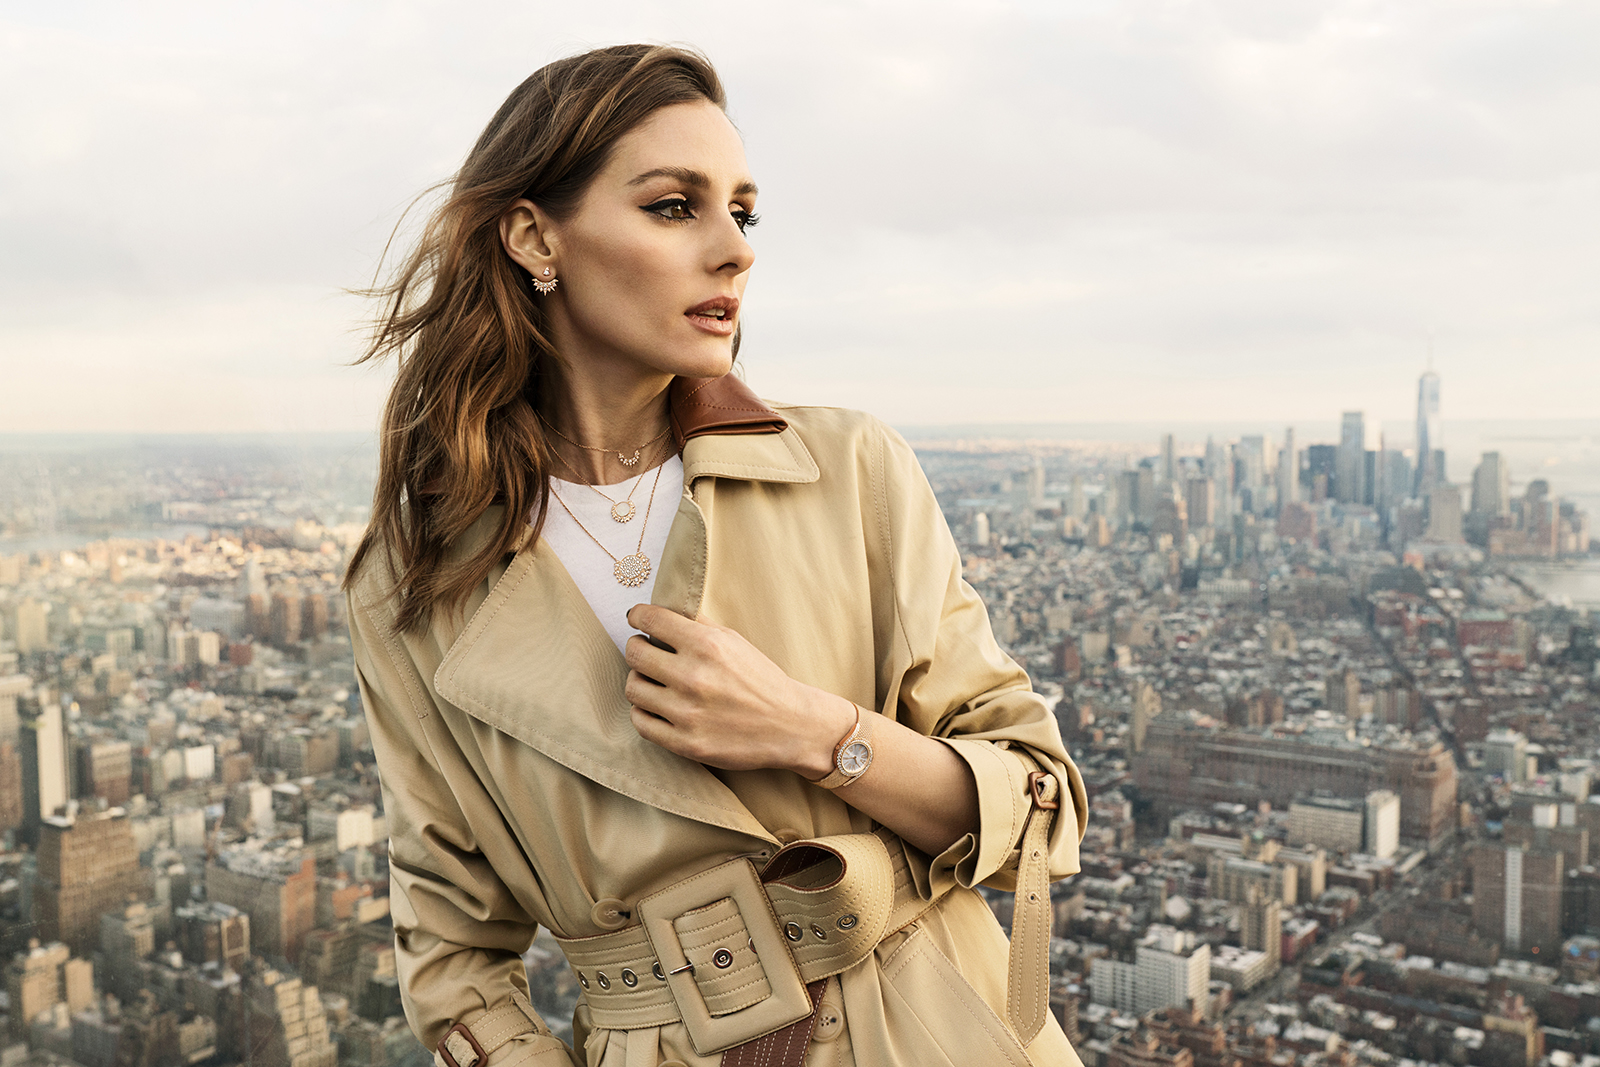 Piaget brand ambassador Olivia Palermo wearing the 'Sunlight' collection